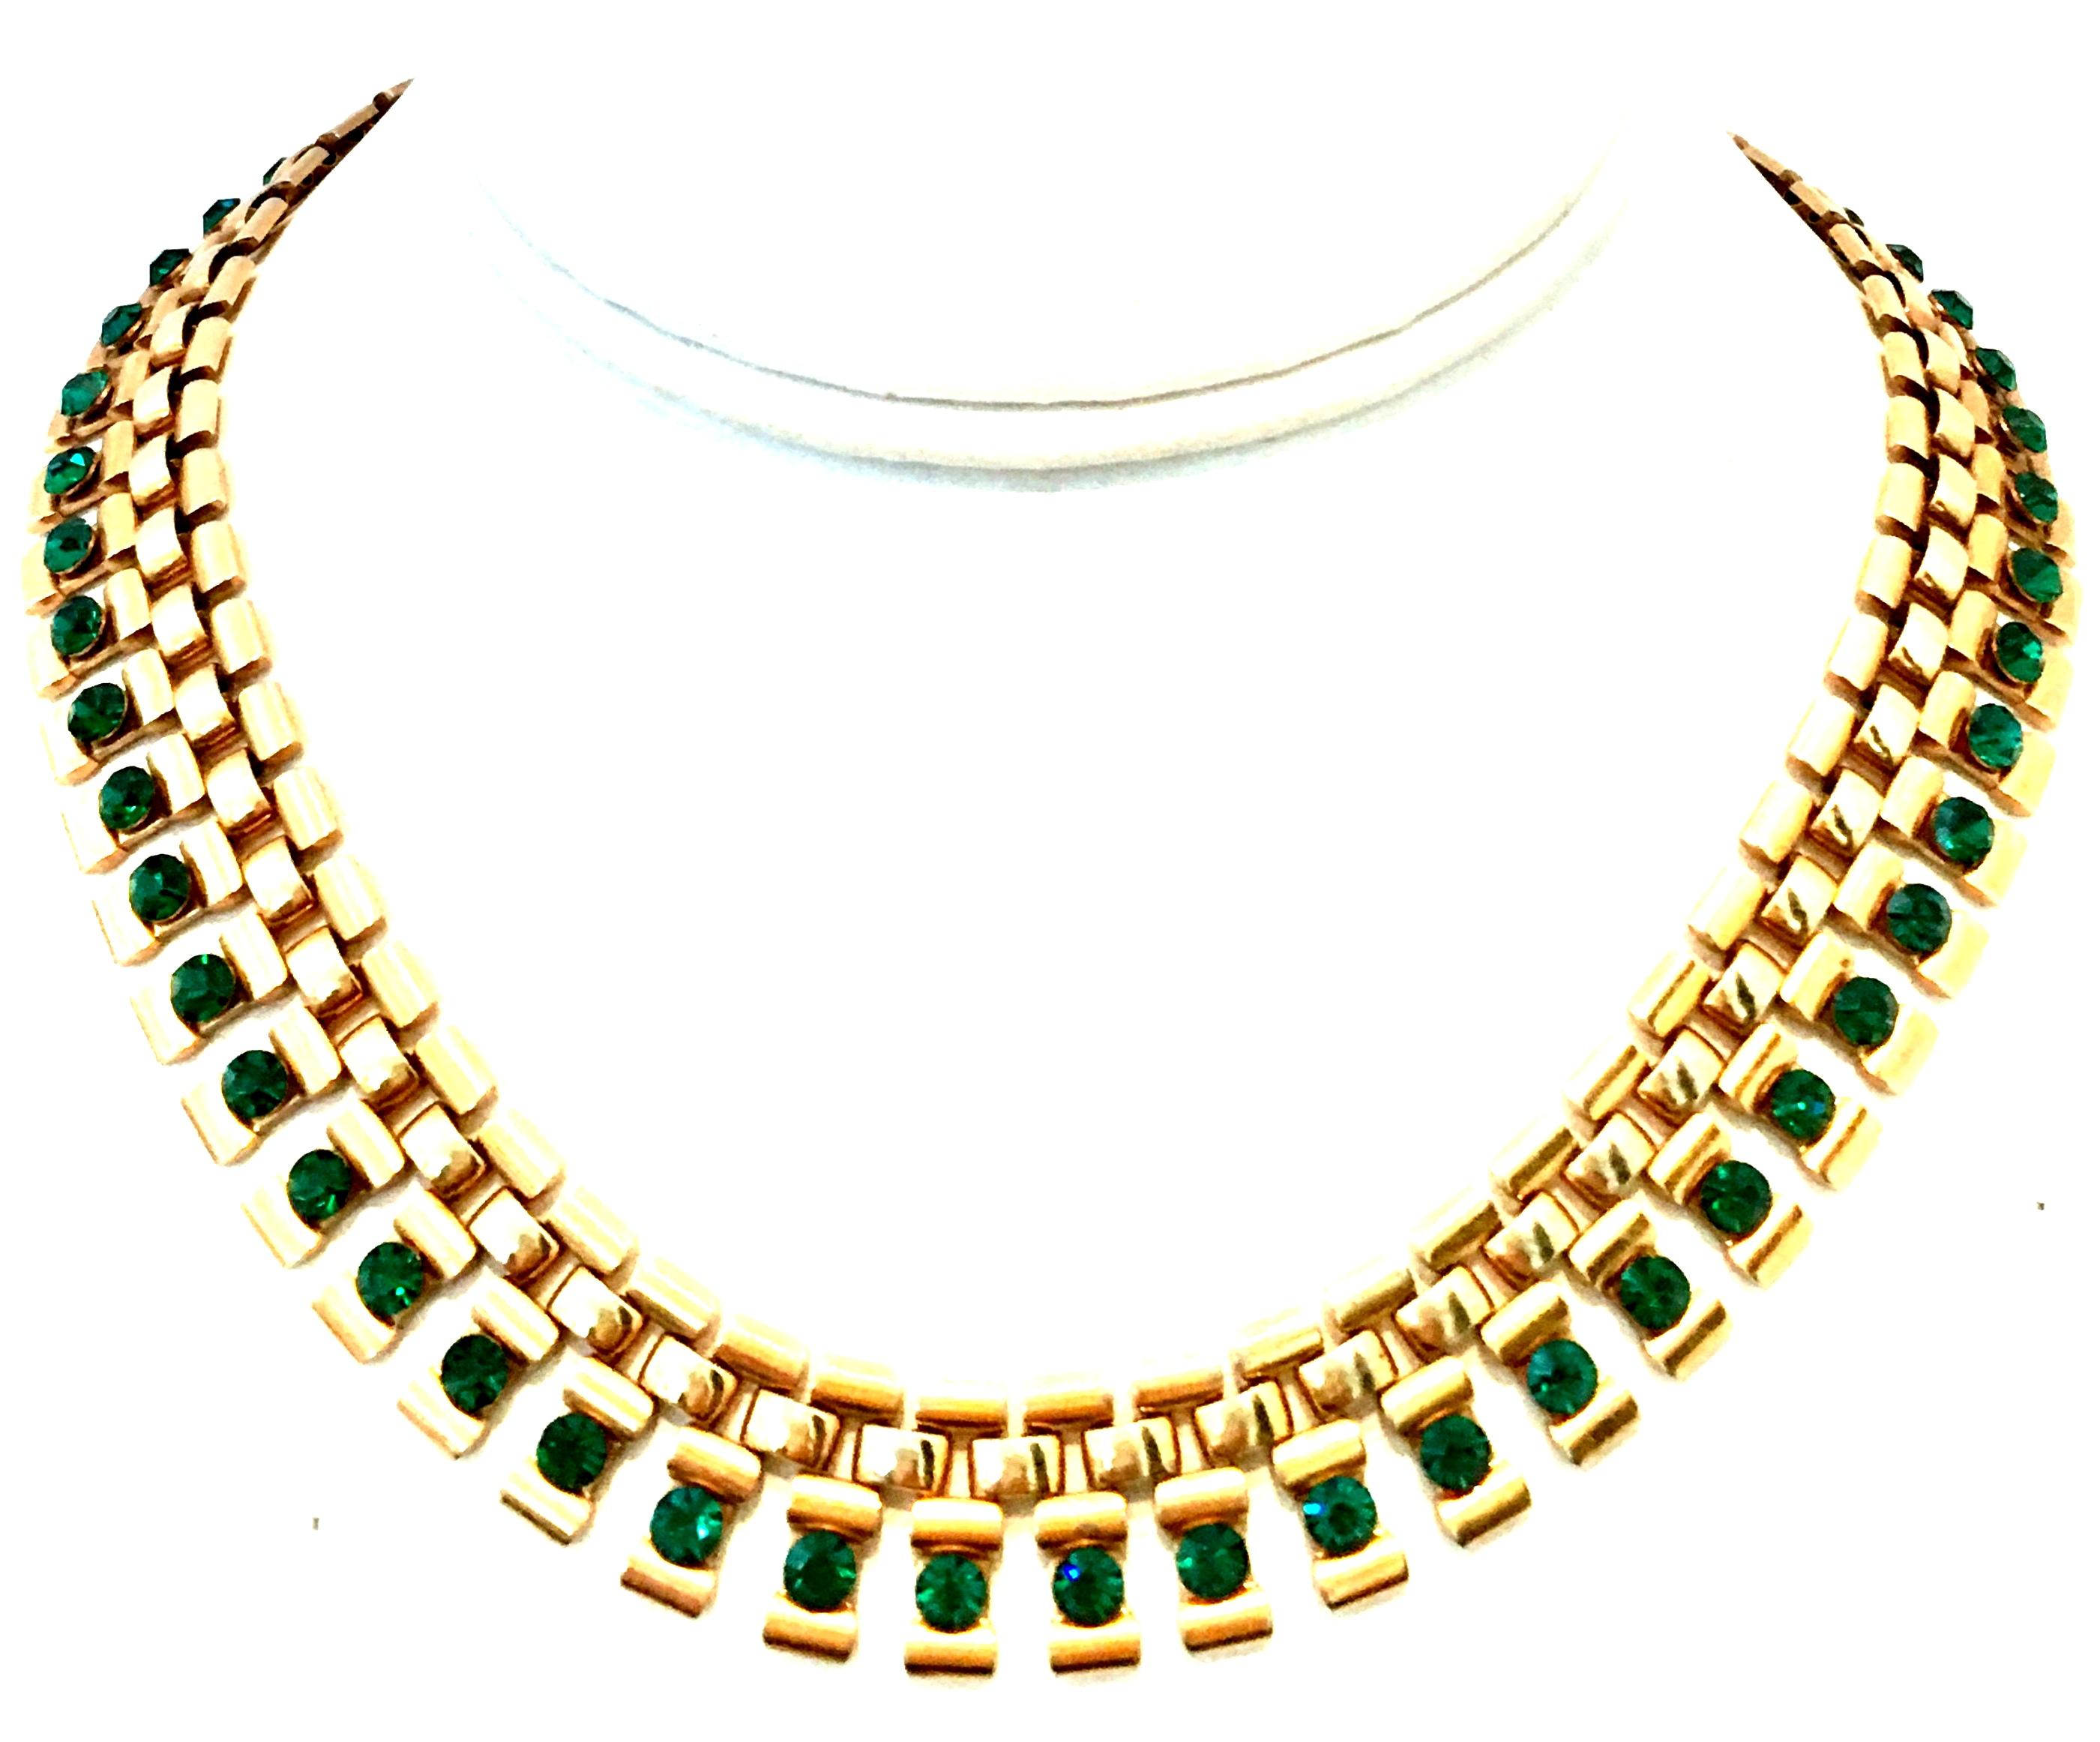 Mid-20th Century Gold Plate & Emerald Austrian Crystal Link Choker Style Necklace. This finely executed piece features gold plate link style choker length necklace with brilliant cut and faceted emerald green Austrian Crystals.